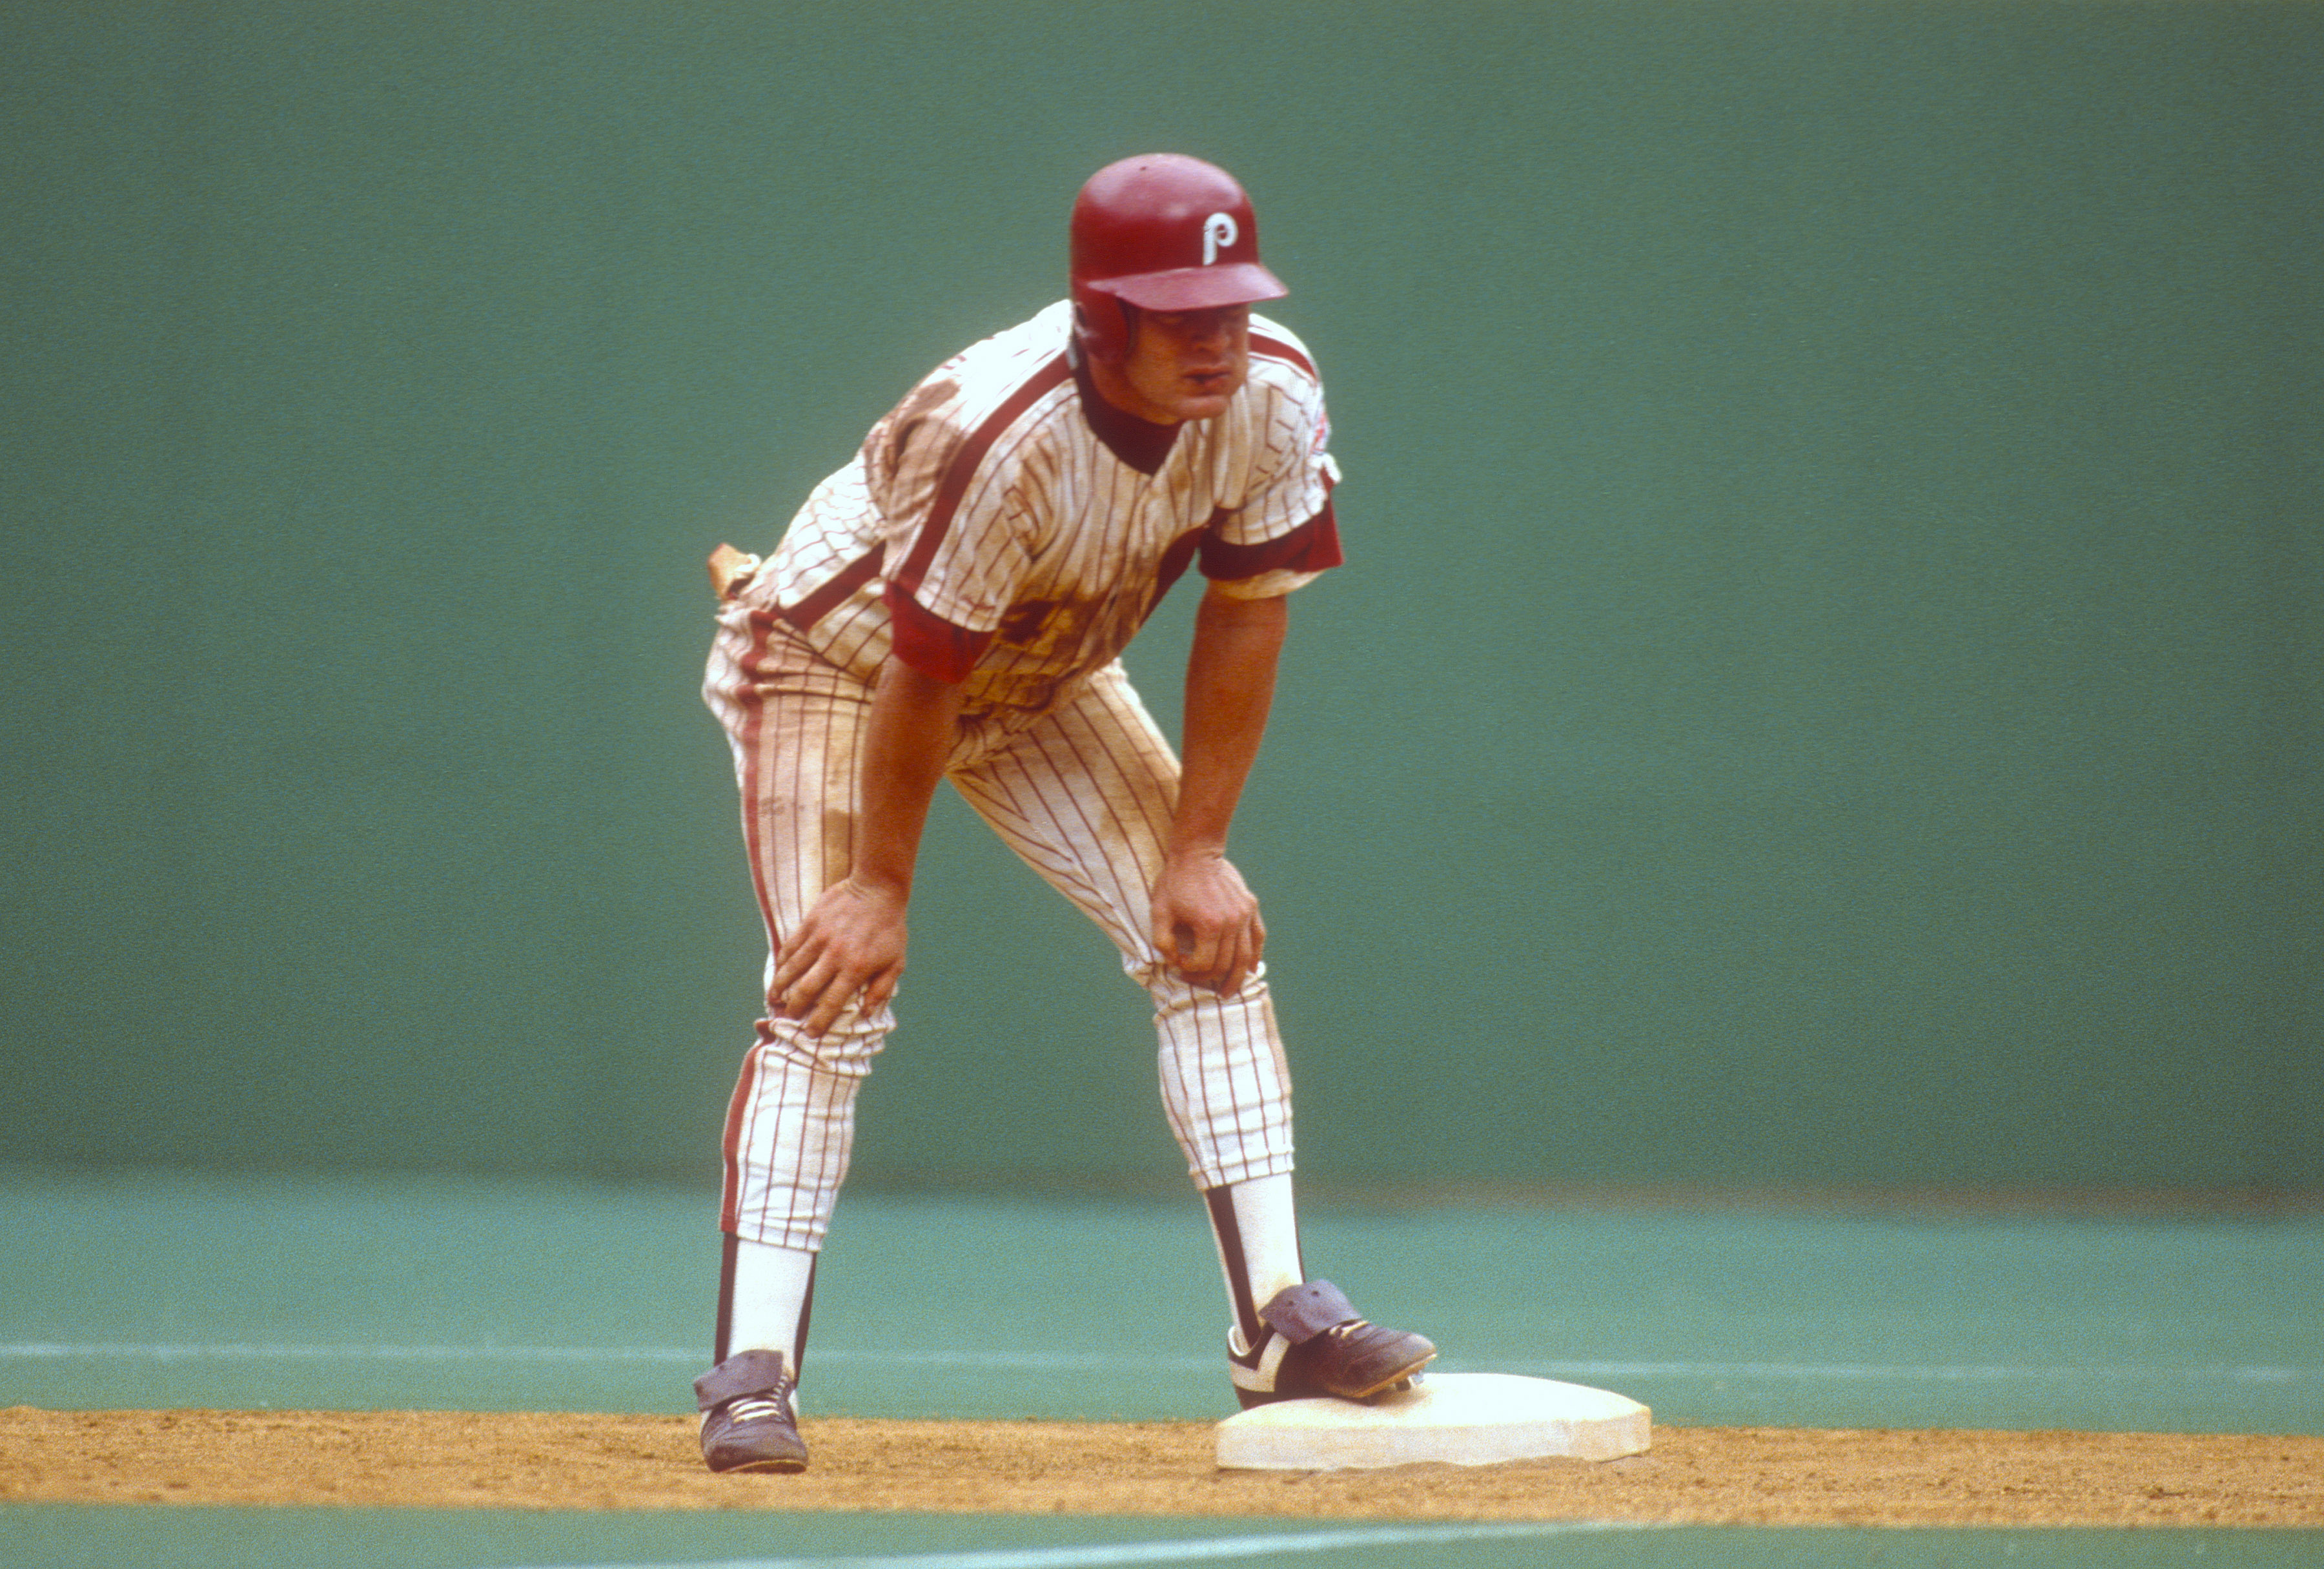 Lenny Dykstra Sets the Bar Pretty Low When Bragging About His Latest 3-Year Run